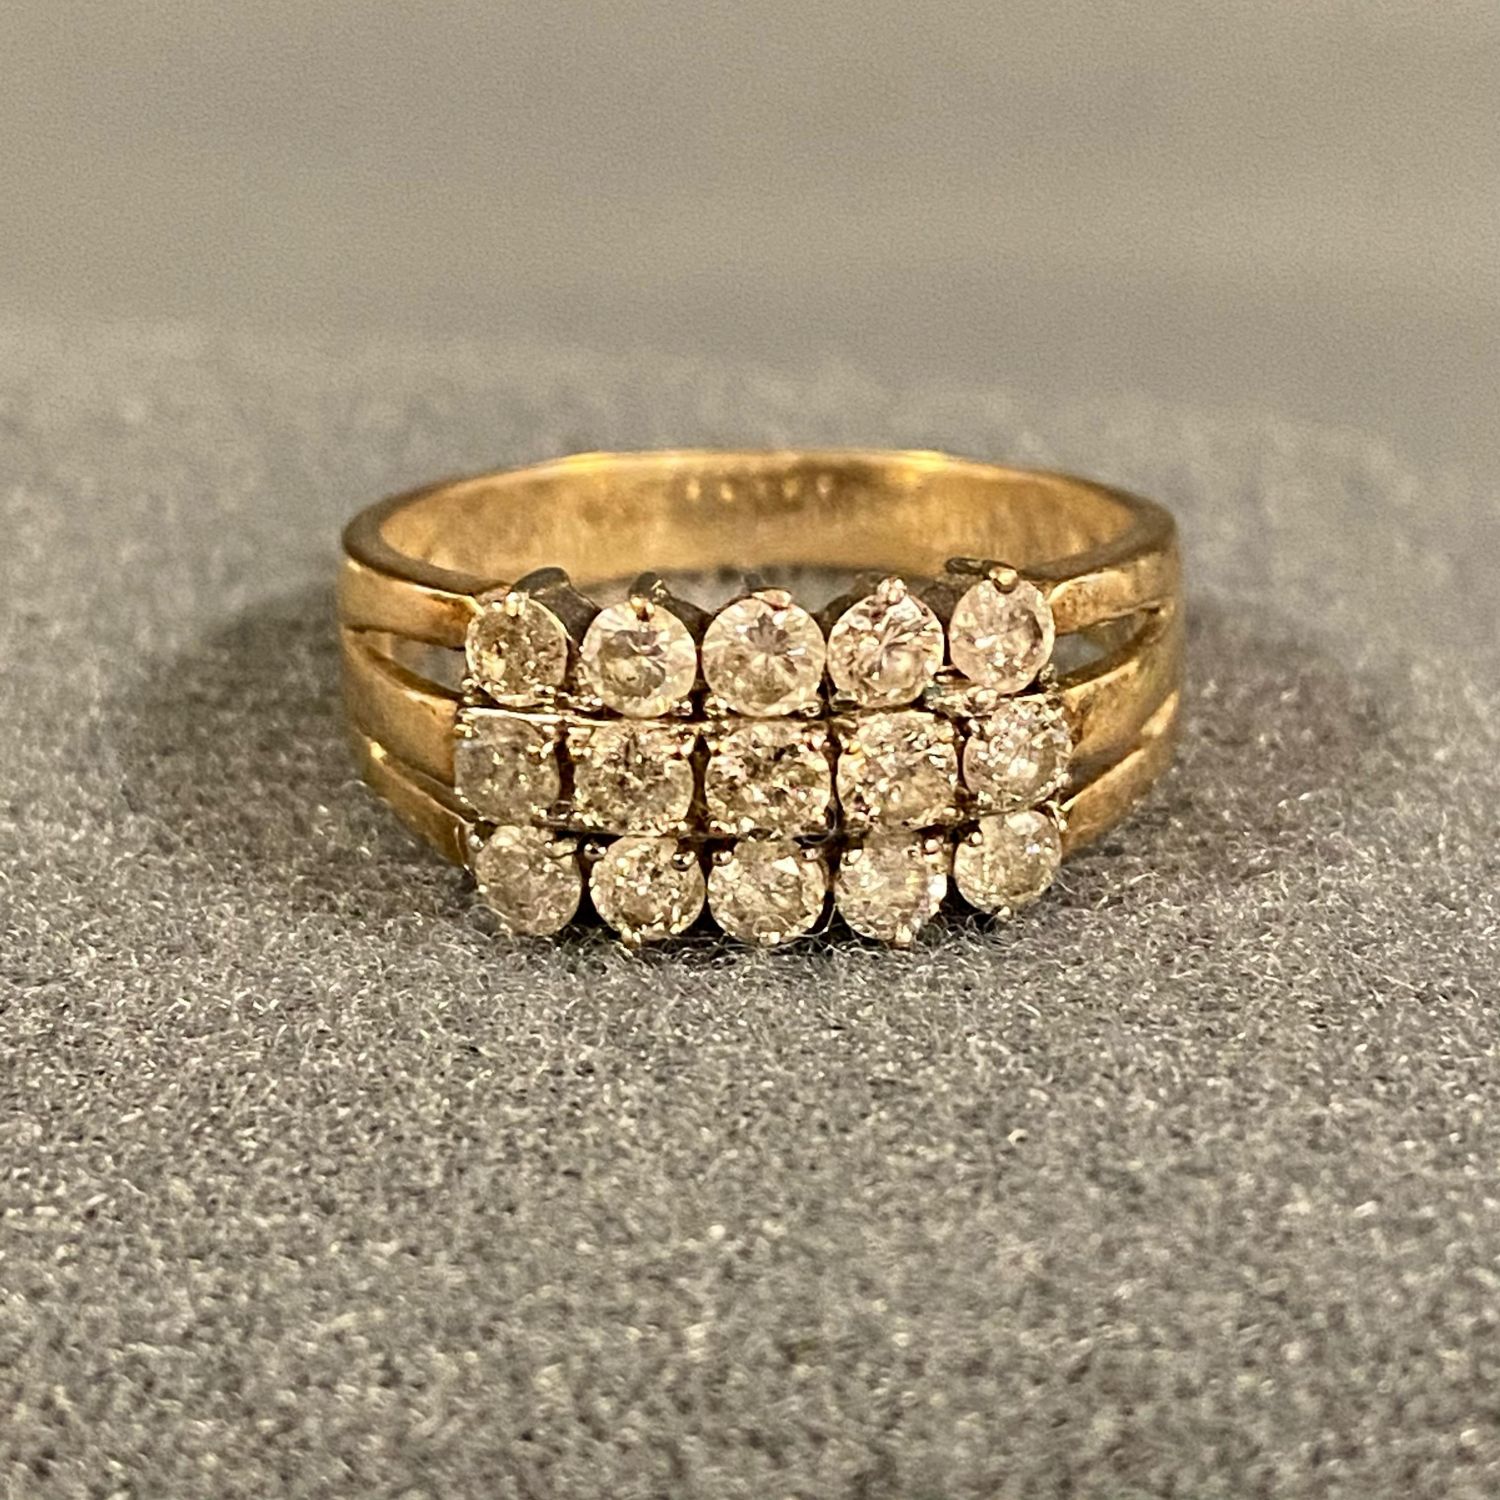 Antique 9ct Gold Ring With Diamonds - Jewellery & Gold - Hemswell ...